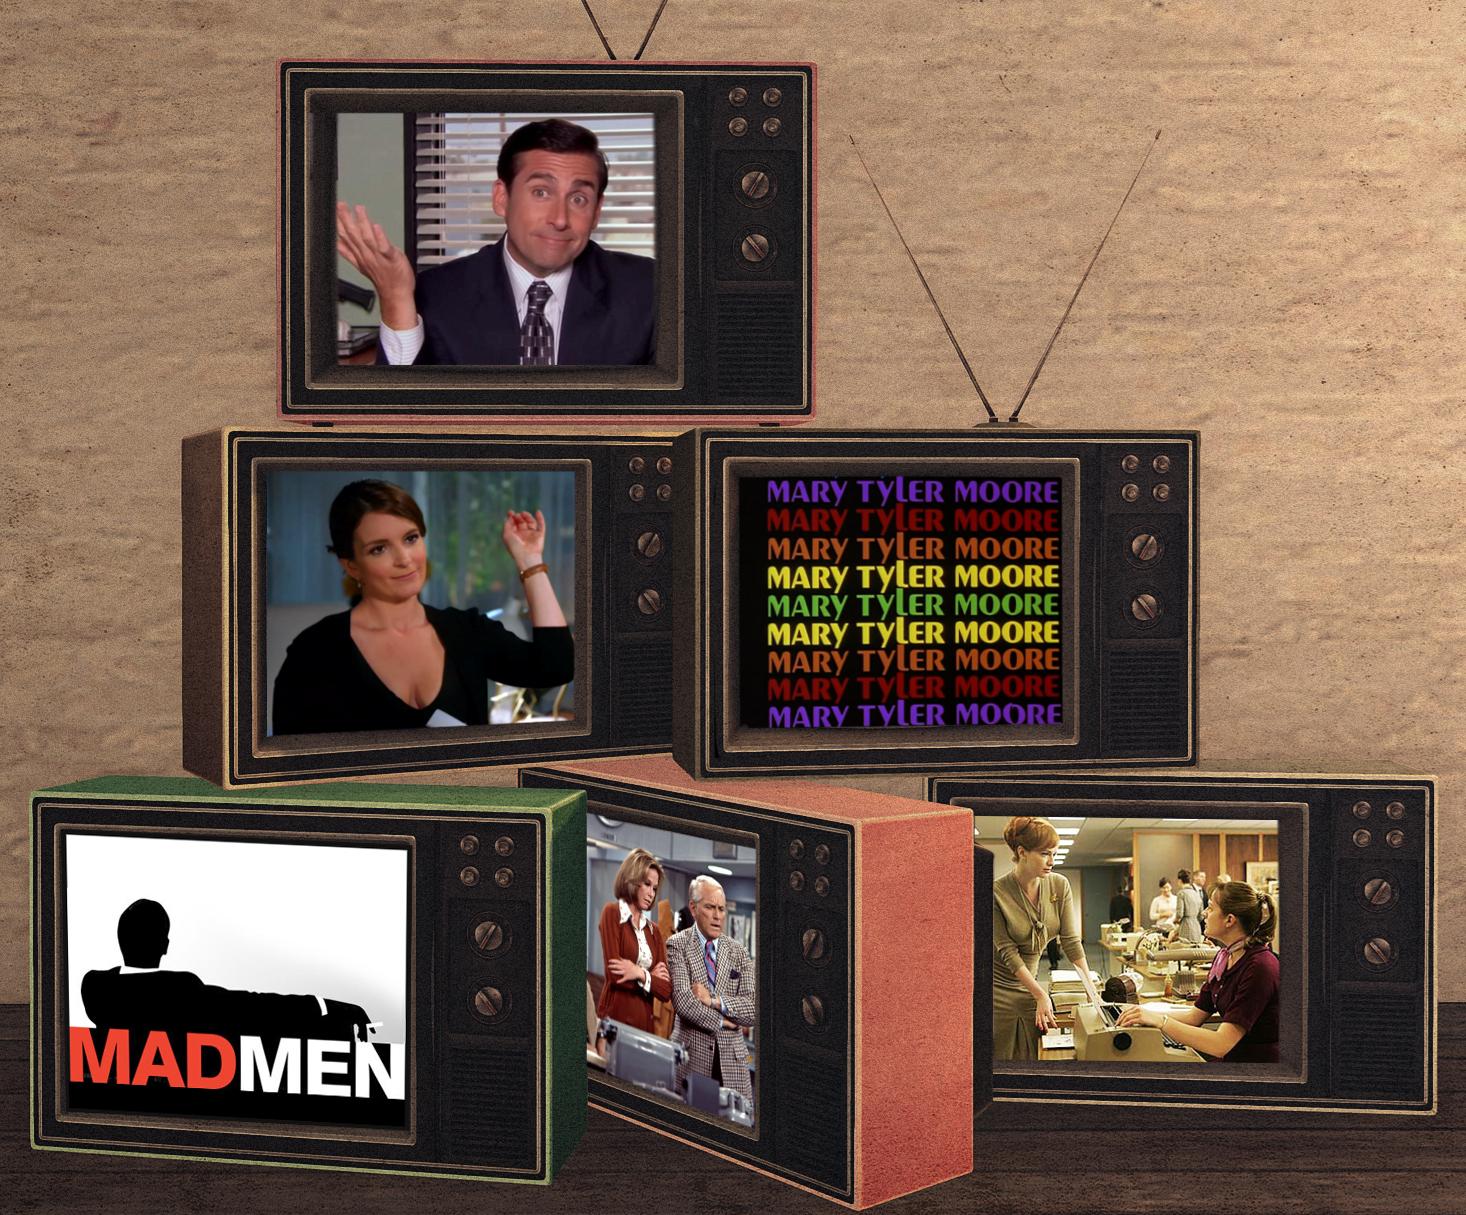 The Office, Great News, The Mary Tyler Moore Show, and Mad Men